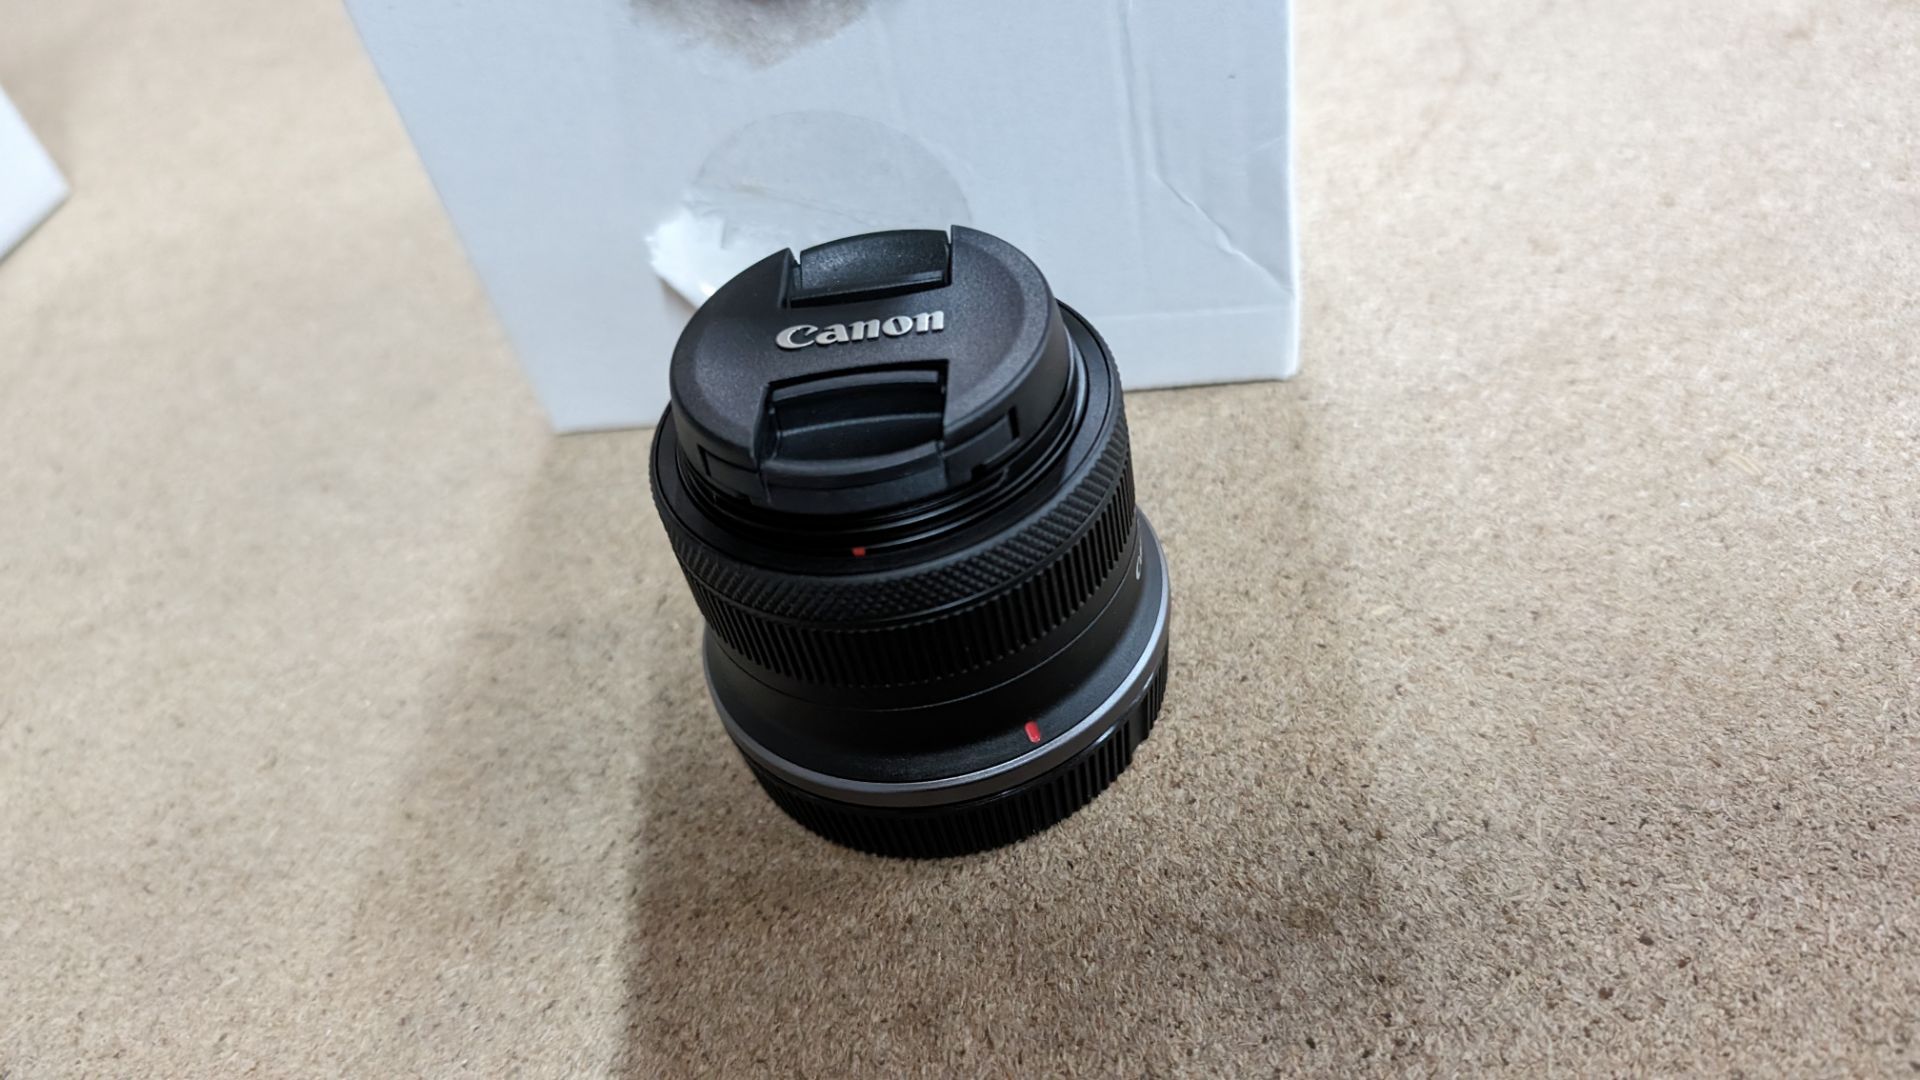 Canon RF-S lens, 18-45mm, f/4.5-6.3 IS STM - Image 6 of 6